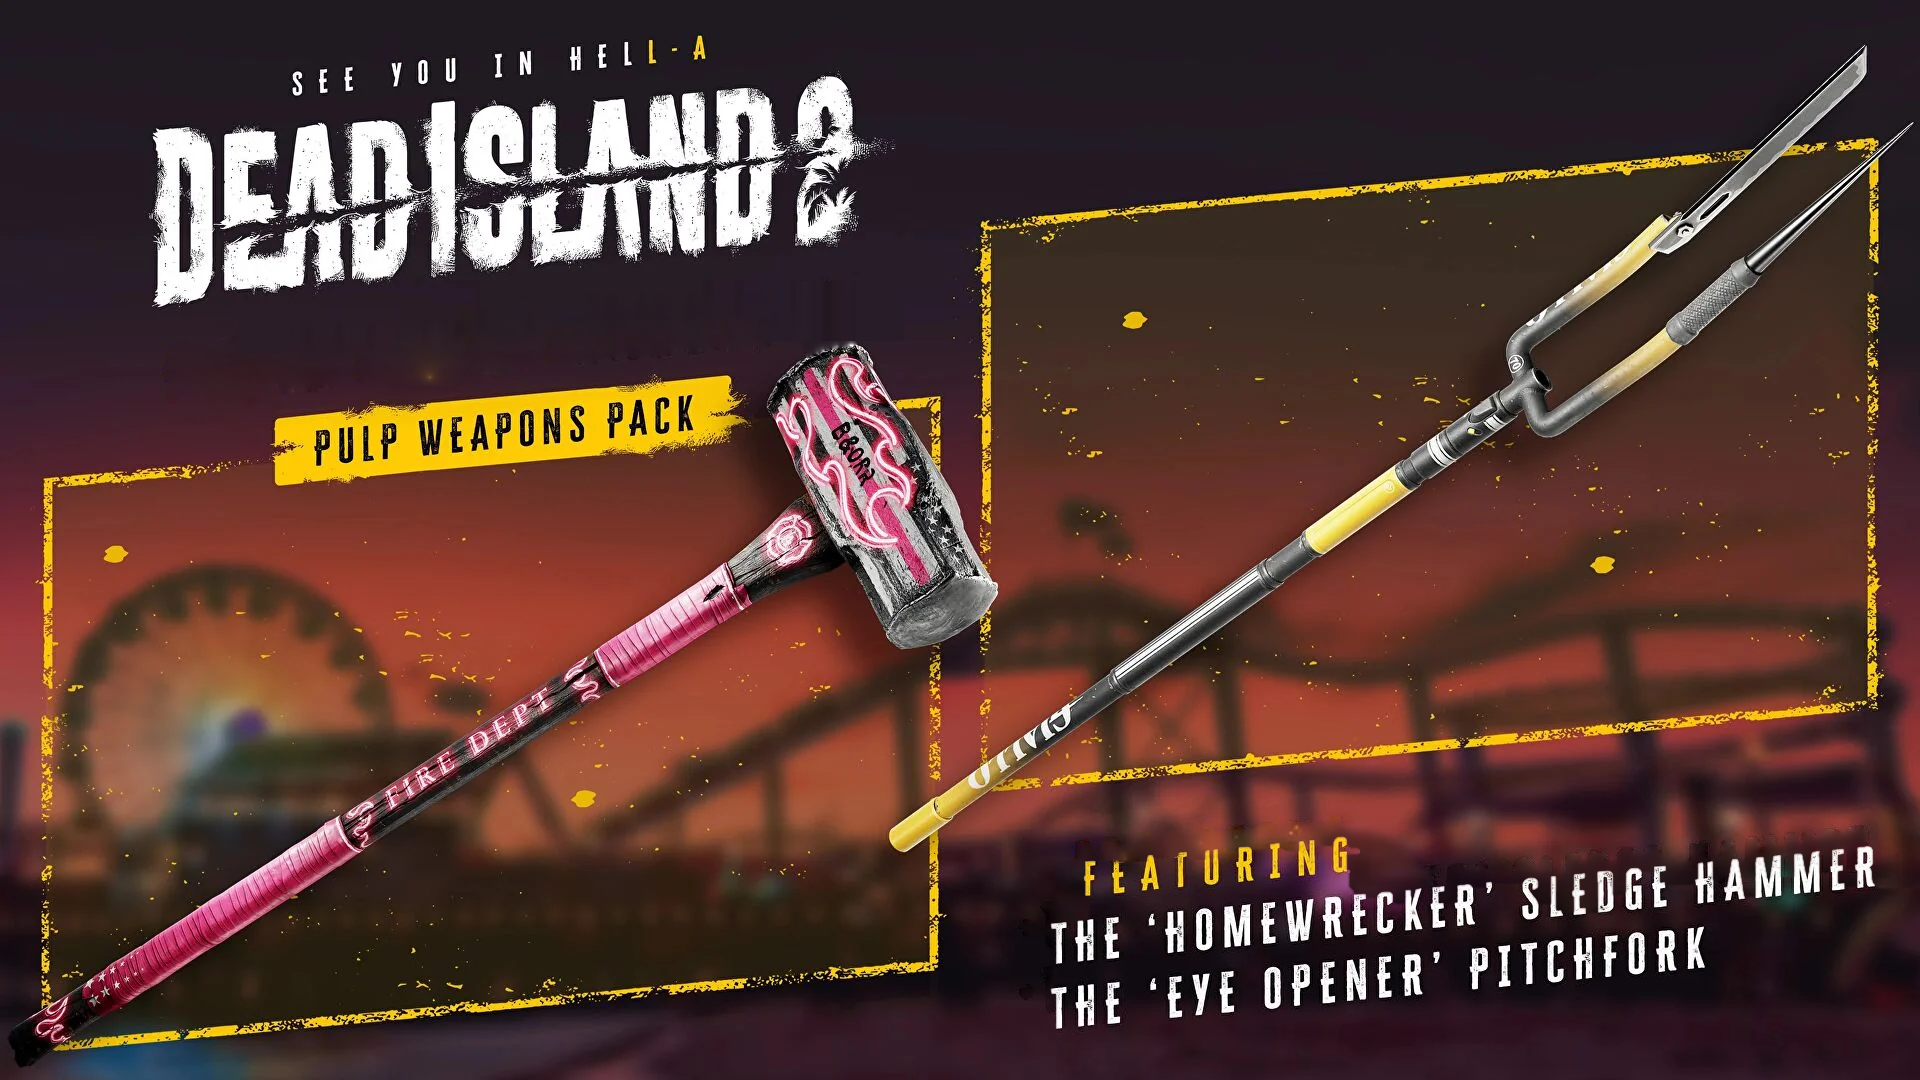 Dead Island 2 - Pulp Weapons Pack DLC Epic Games CD Key, $2.02